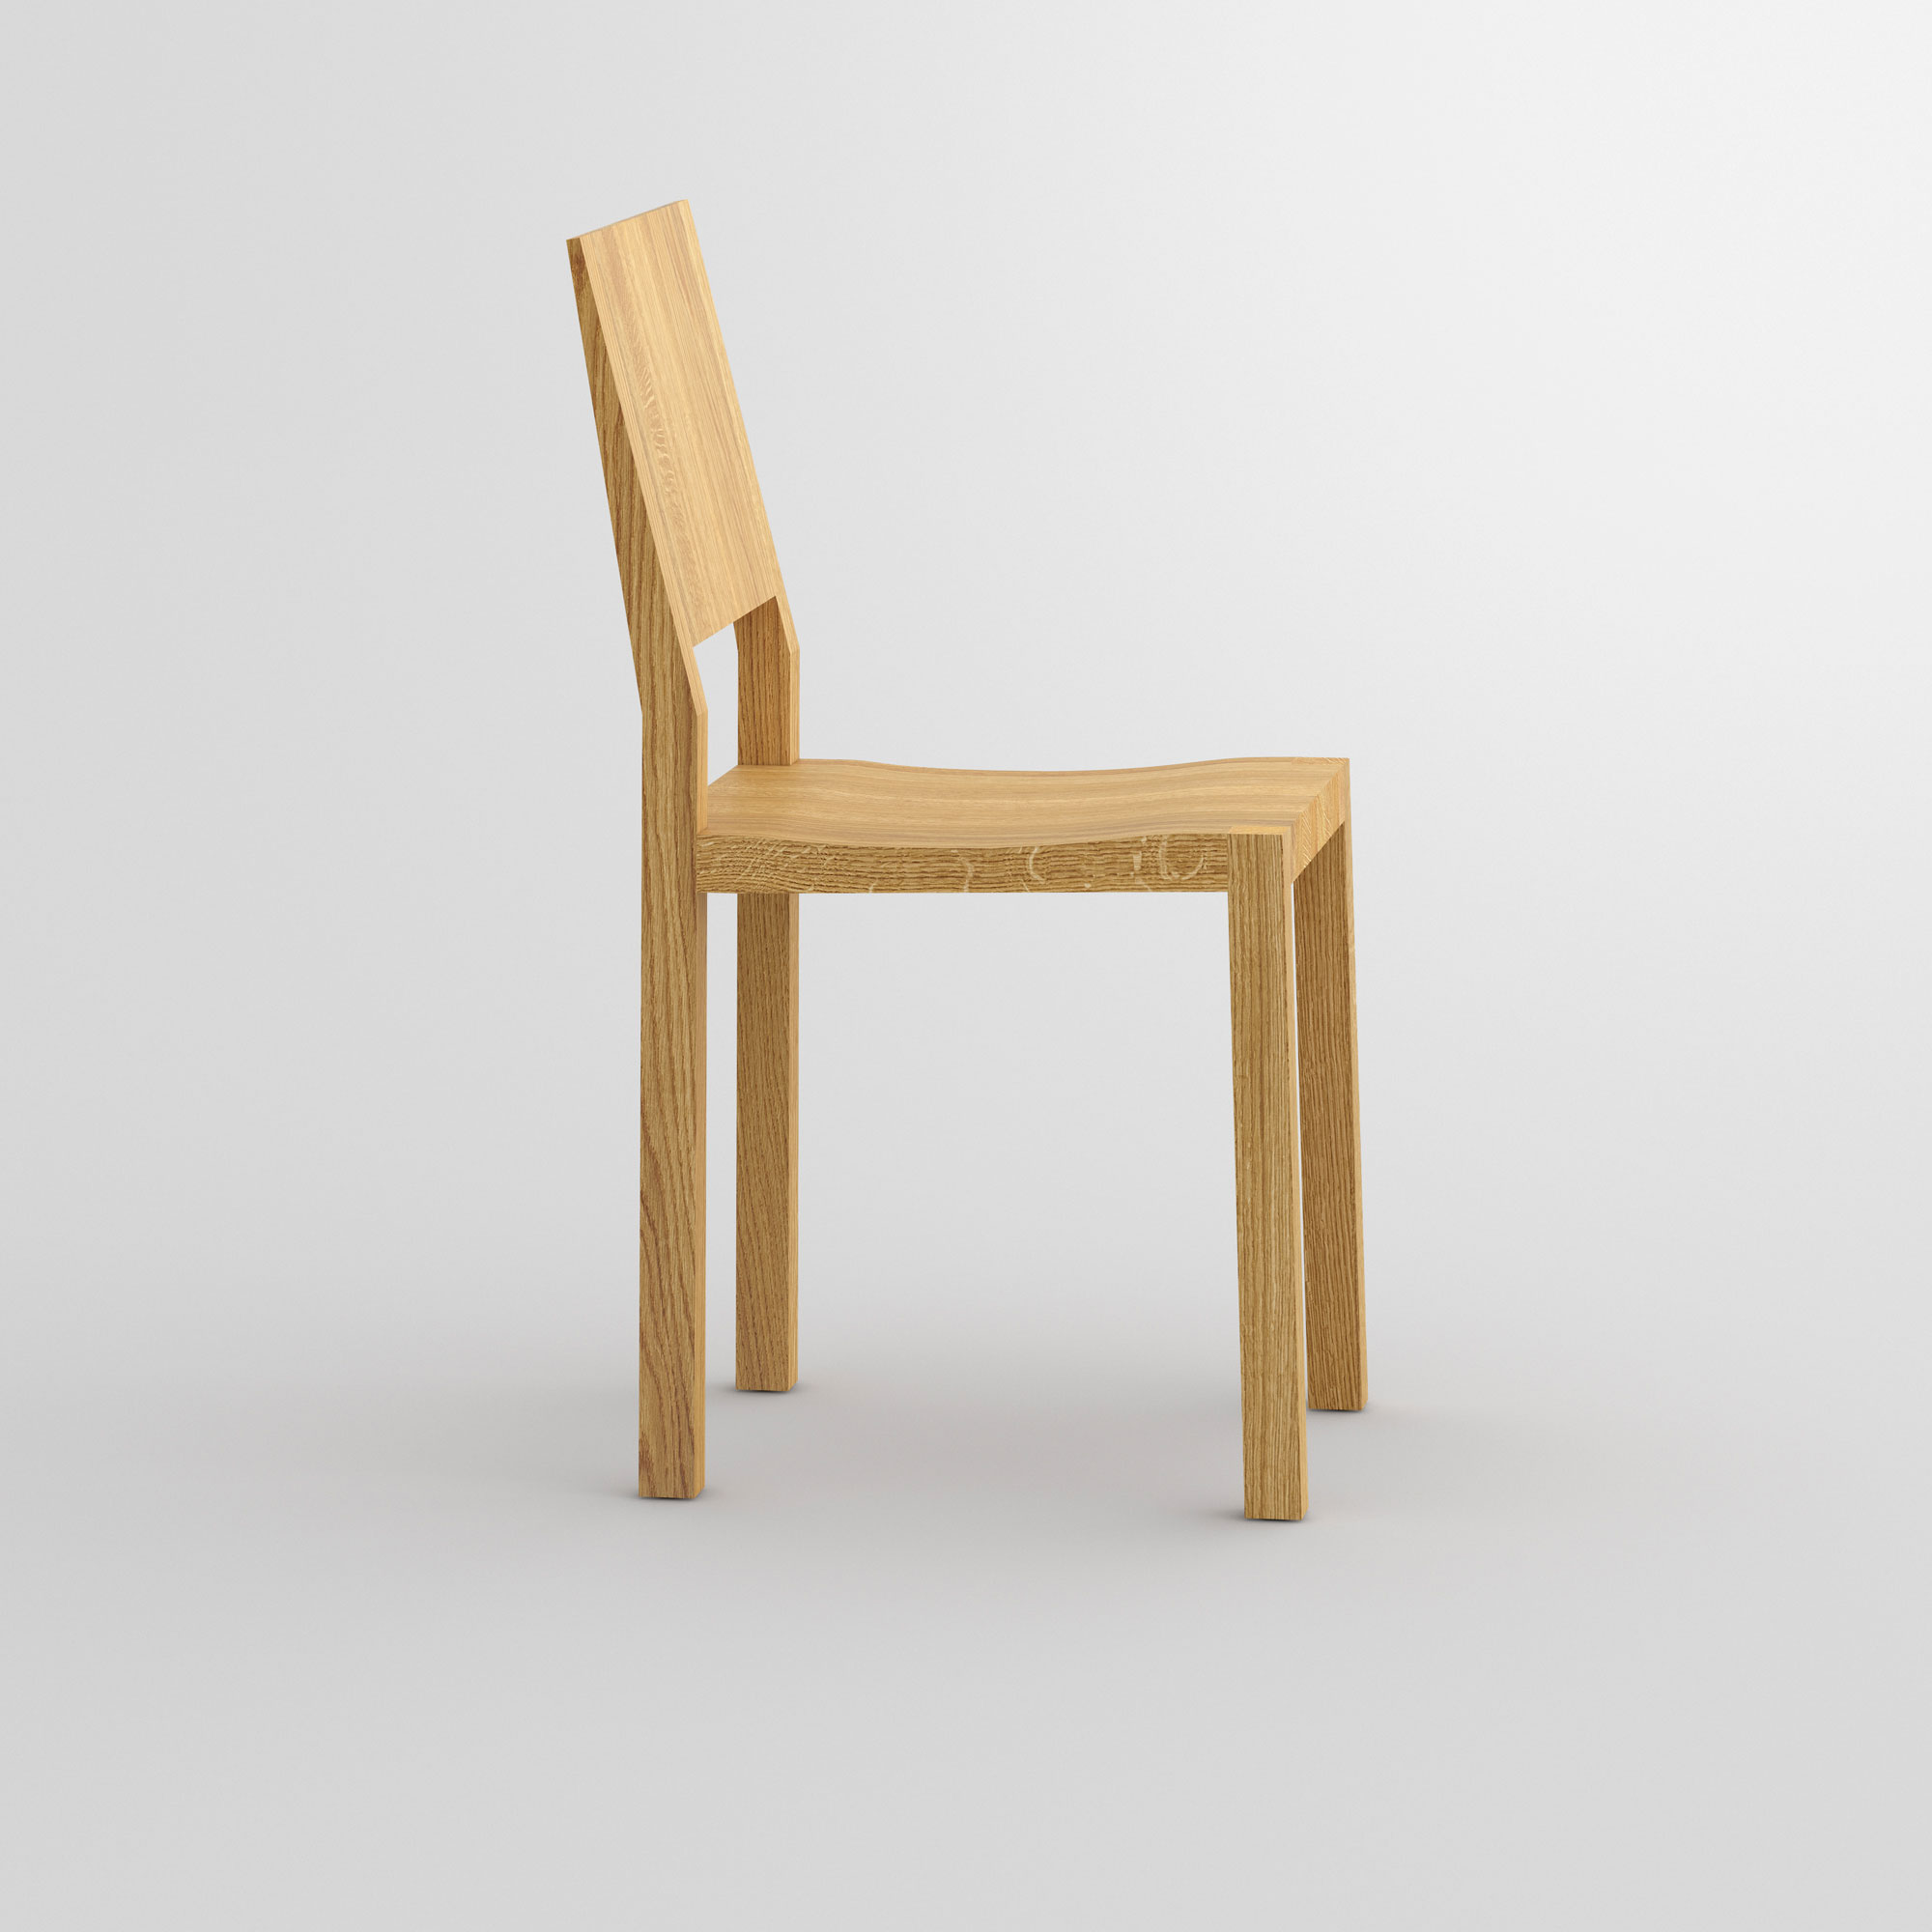 Solid Wood Chair TAU cam4 custom made in solid wood by vitamin design